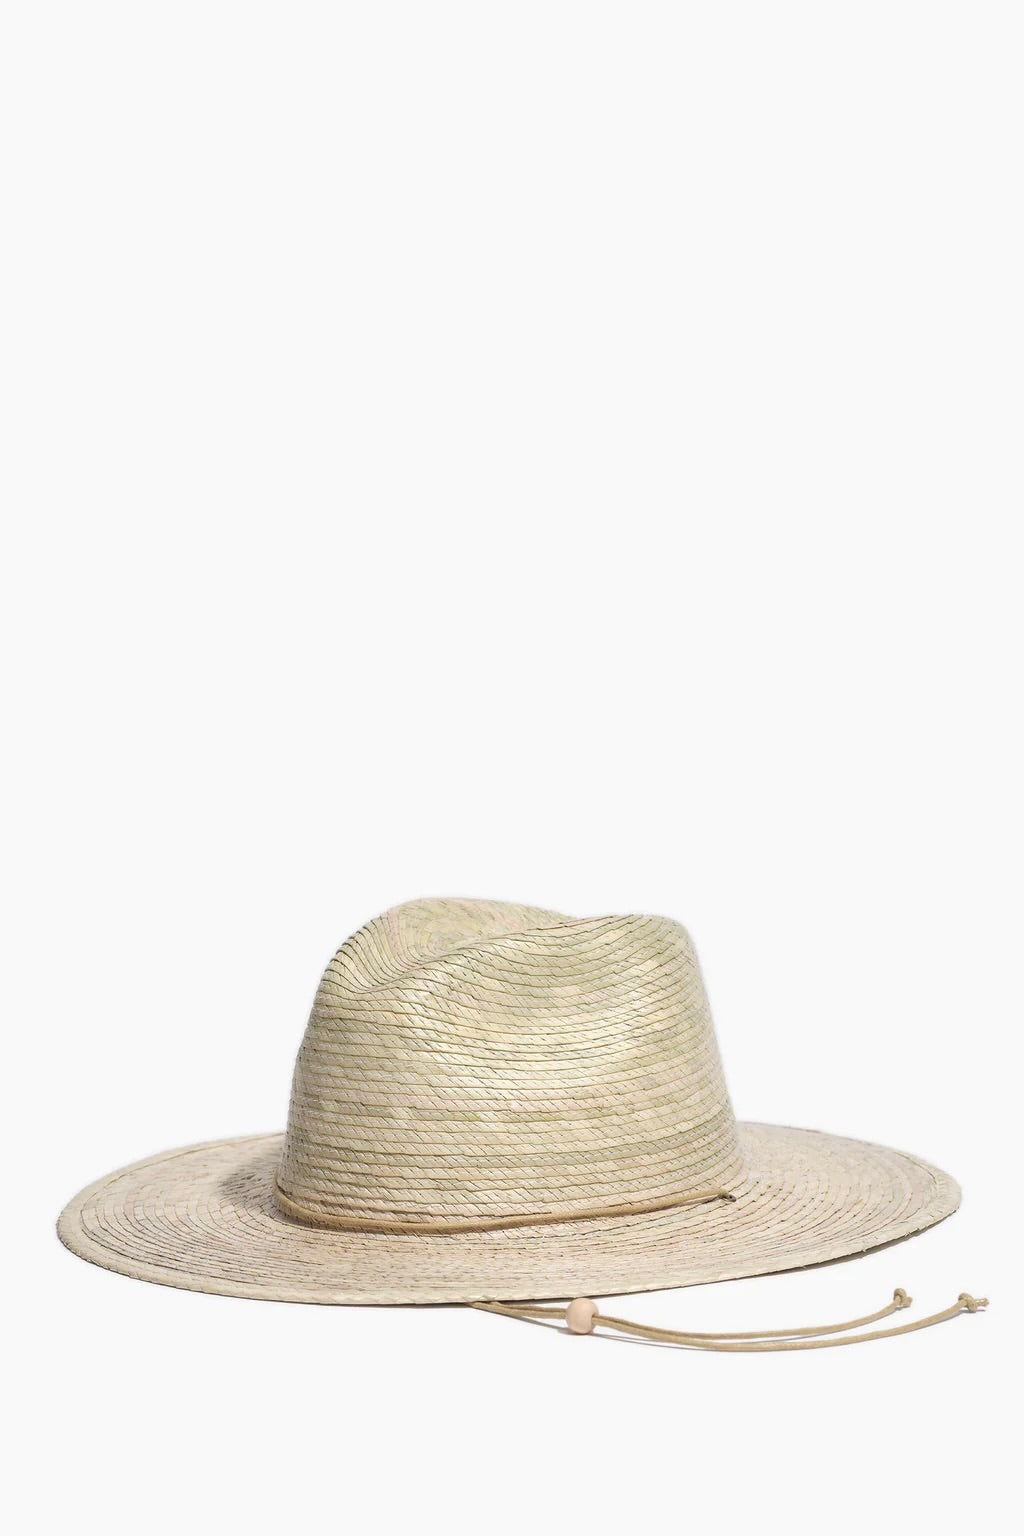 Small Lot PALM HAT / Natural